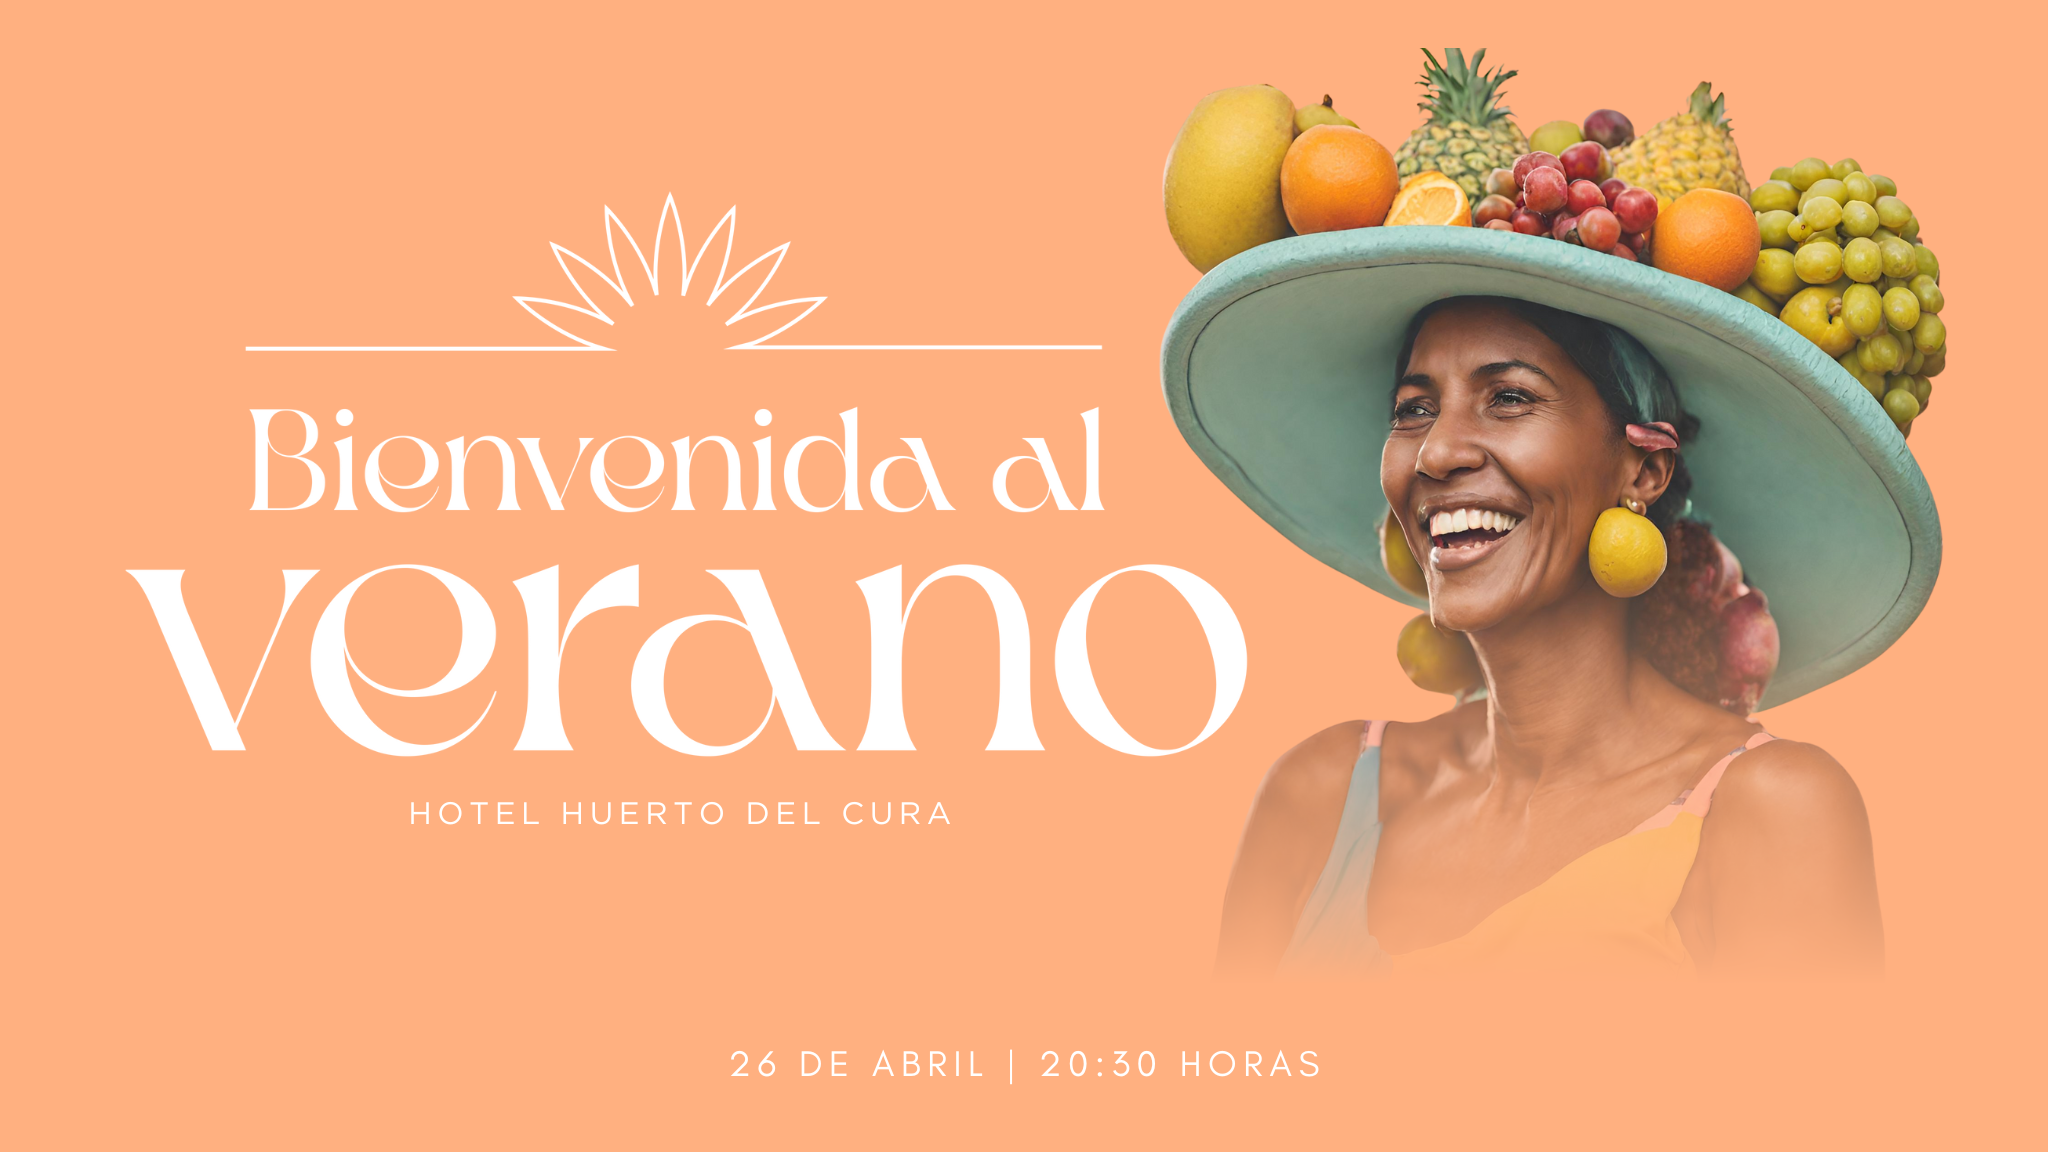 a woman wearing a hat with fruit on it says bienvenido al verano